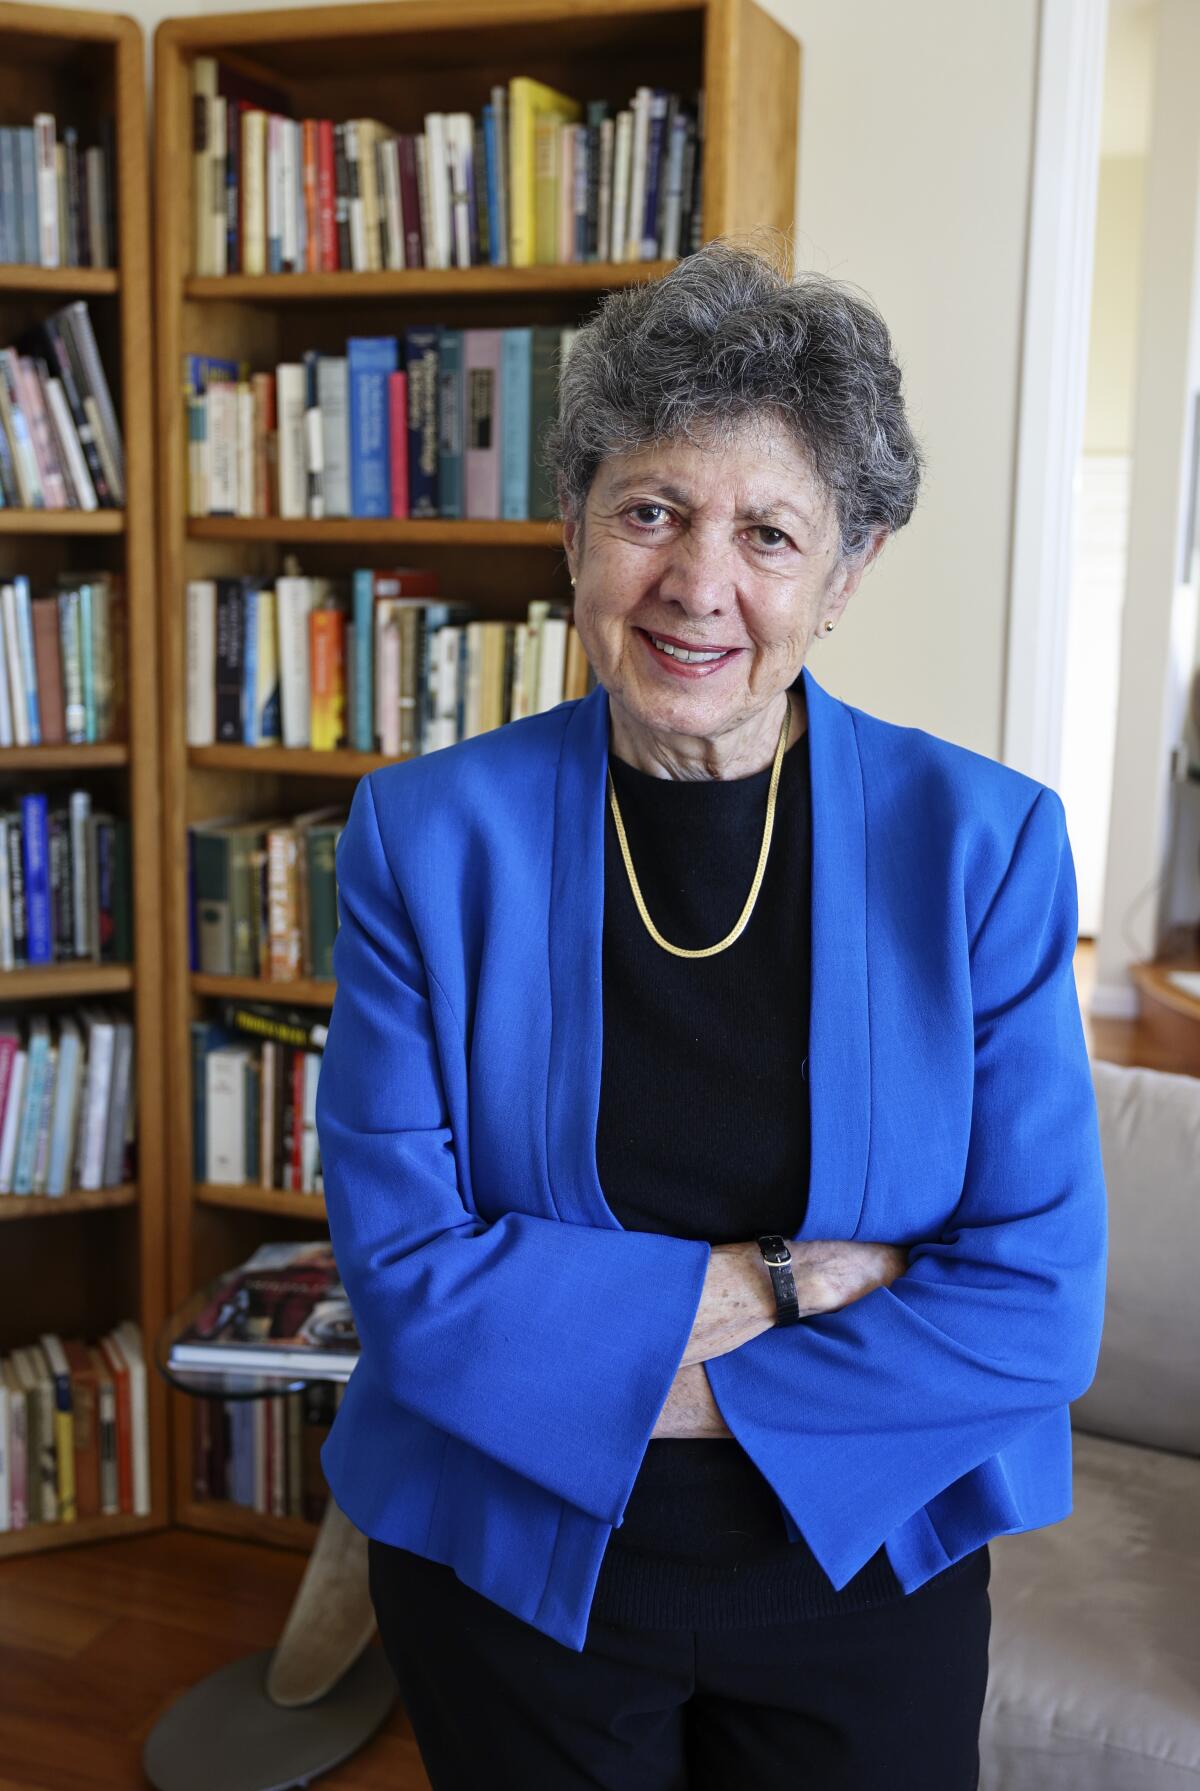 An older woman poses in a blue jacket, arms crossed, in front of a bookcase